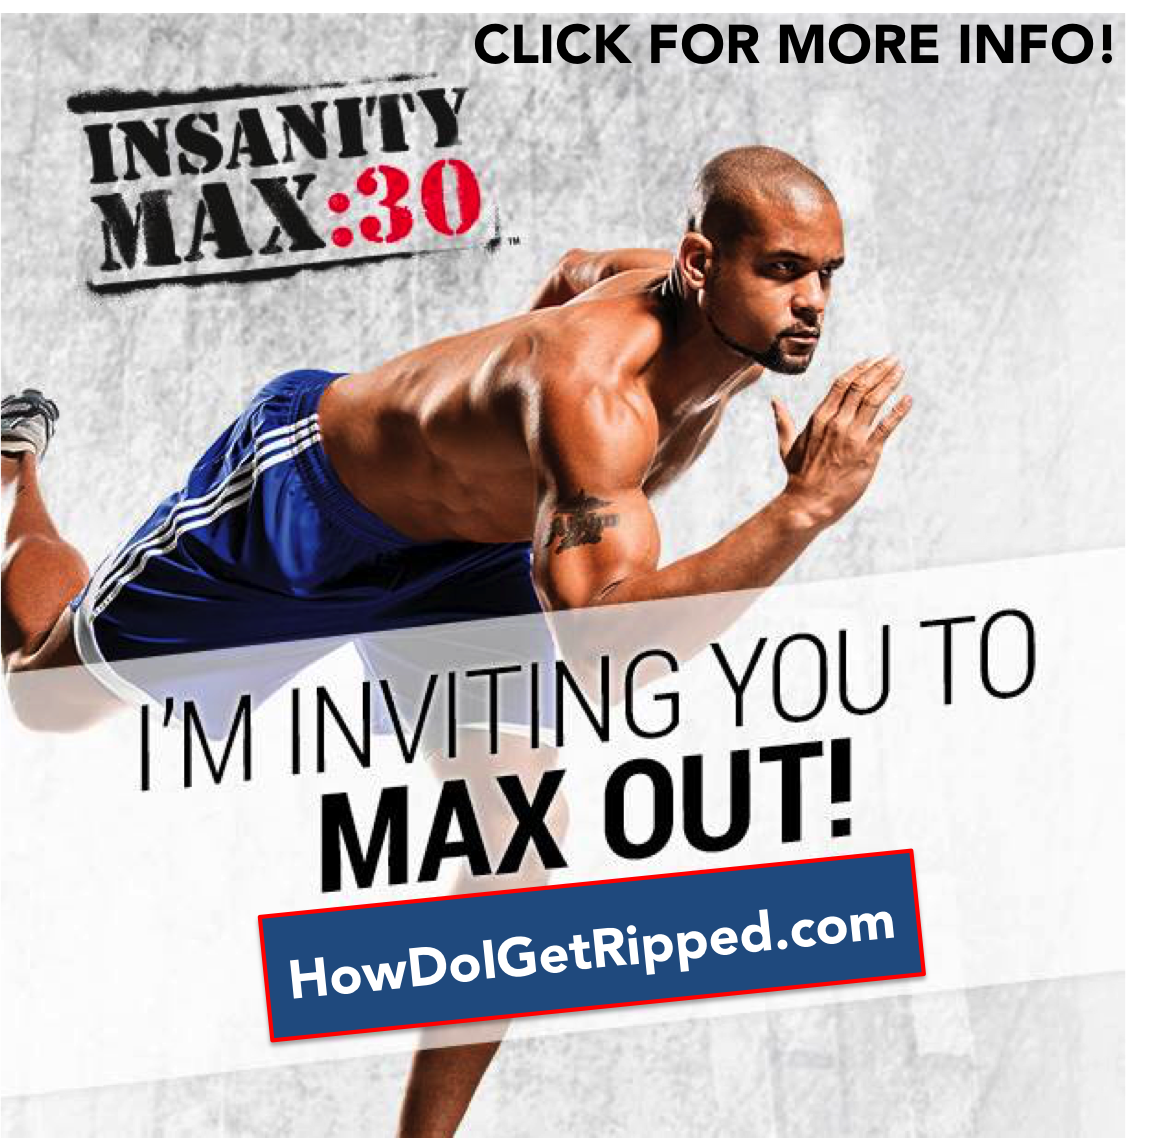 Does Insanity Max30 Work? Workout Reviews List) How Do I